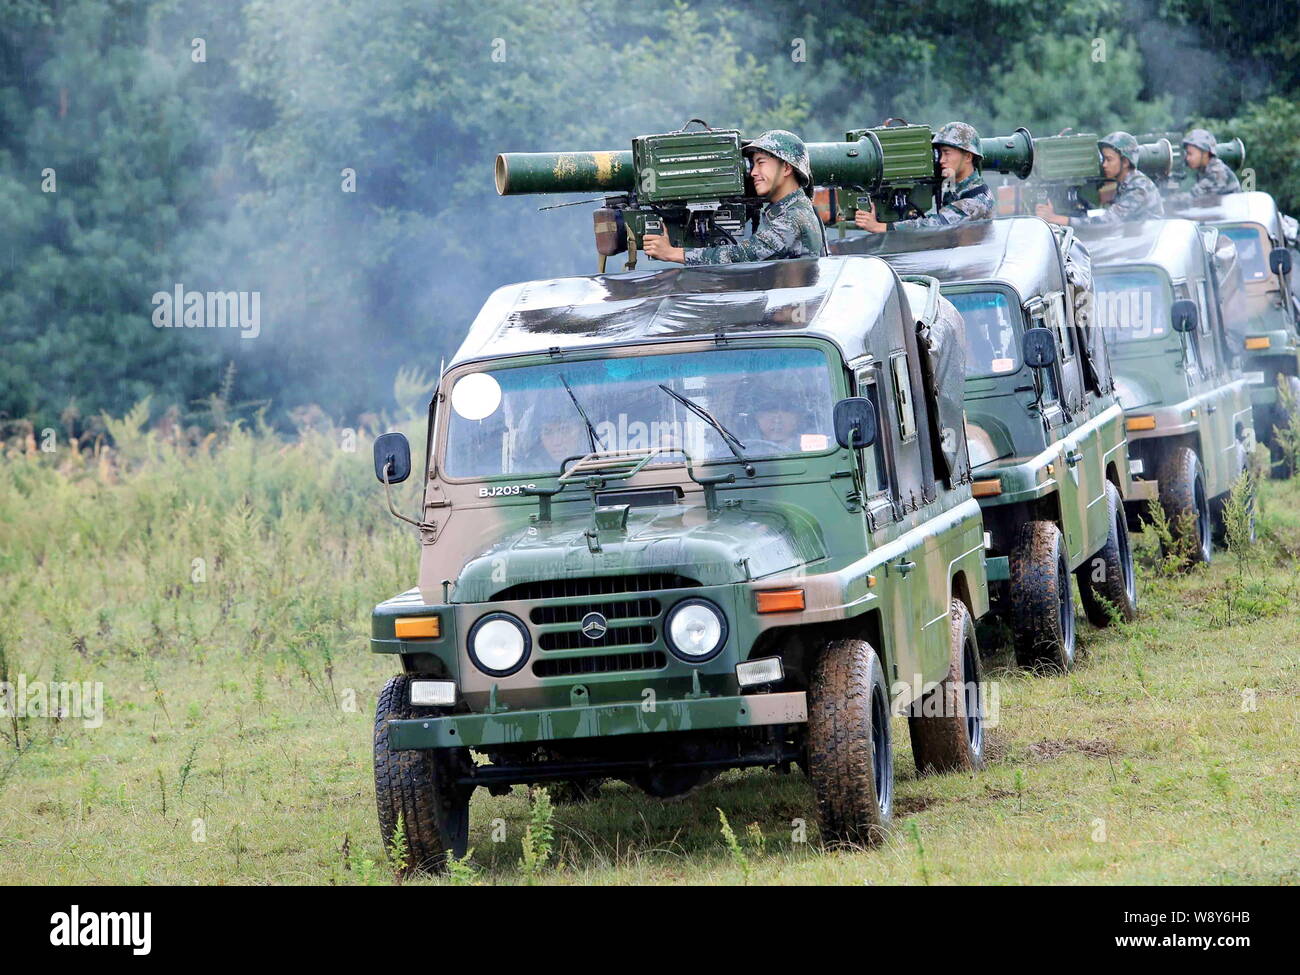 --FILE--Chinese PLA (People's Liberation Army) soldiers launch anti-tank missles on jeeps during a military drill in southwest China's Sichuan provinc Stock Photo